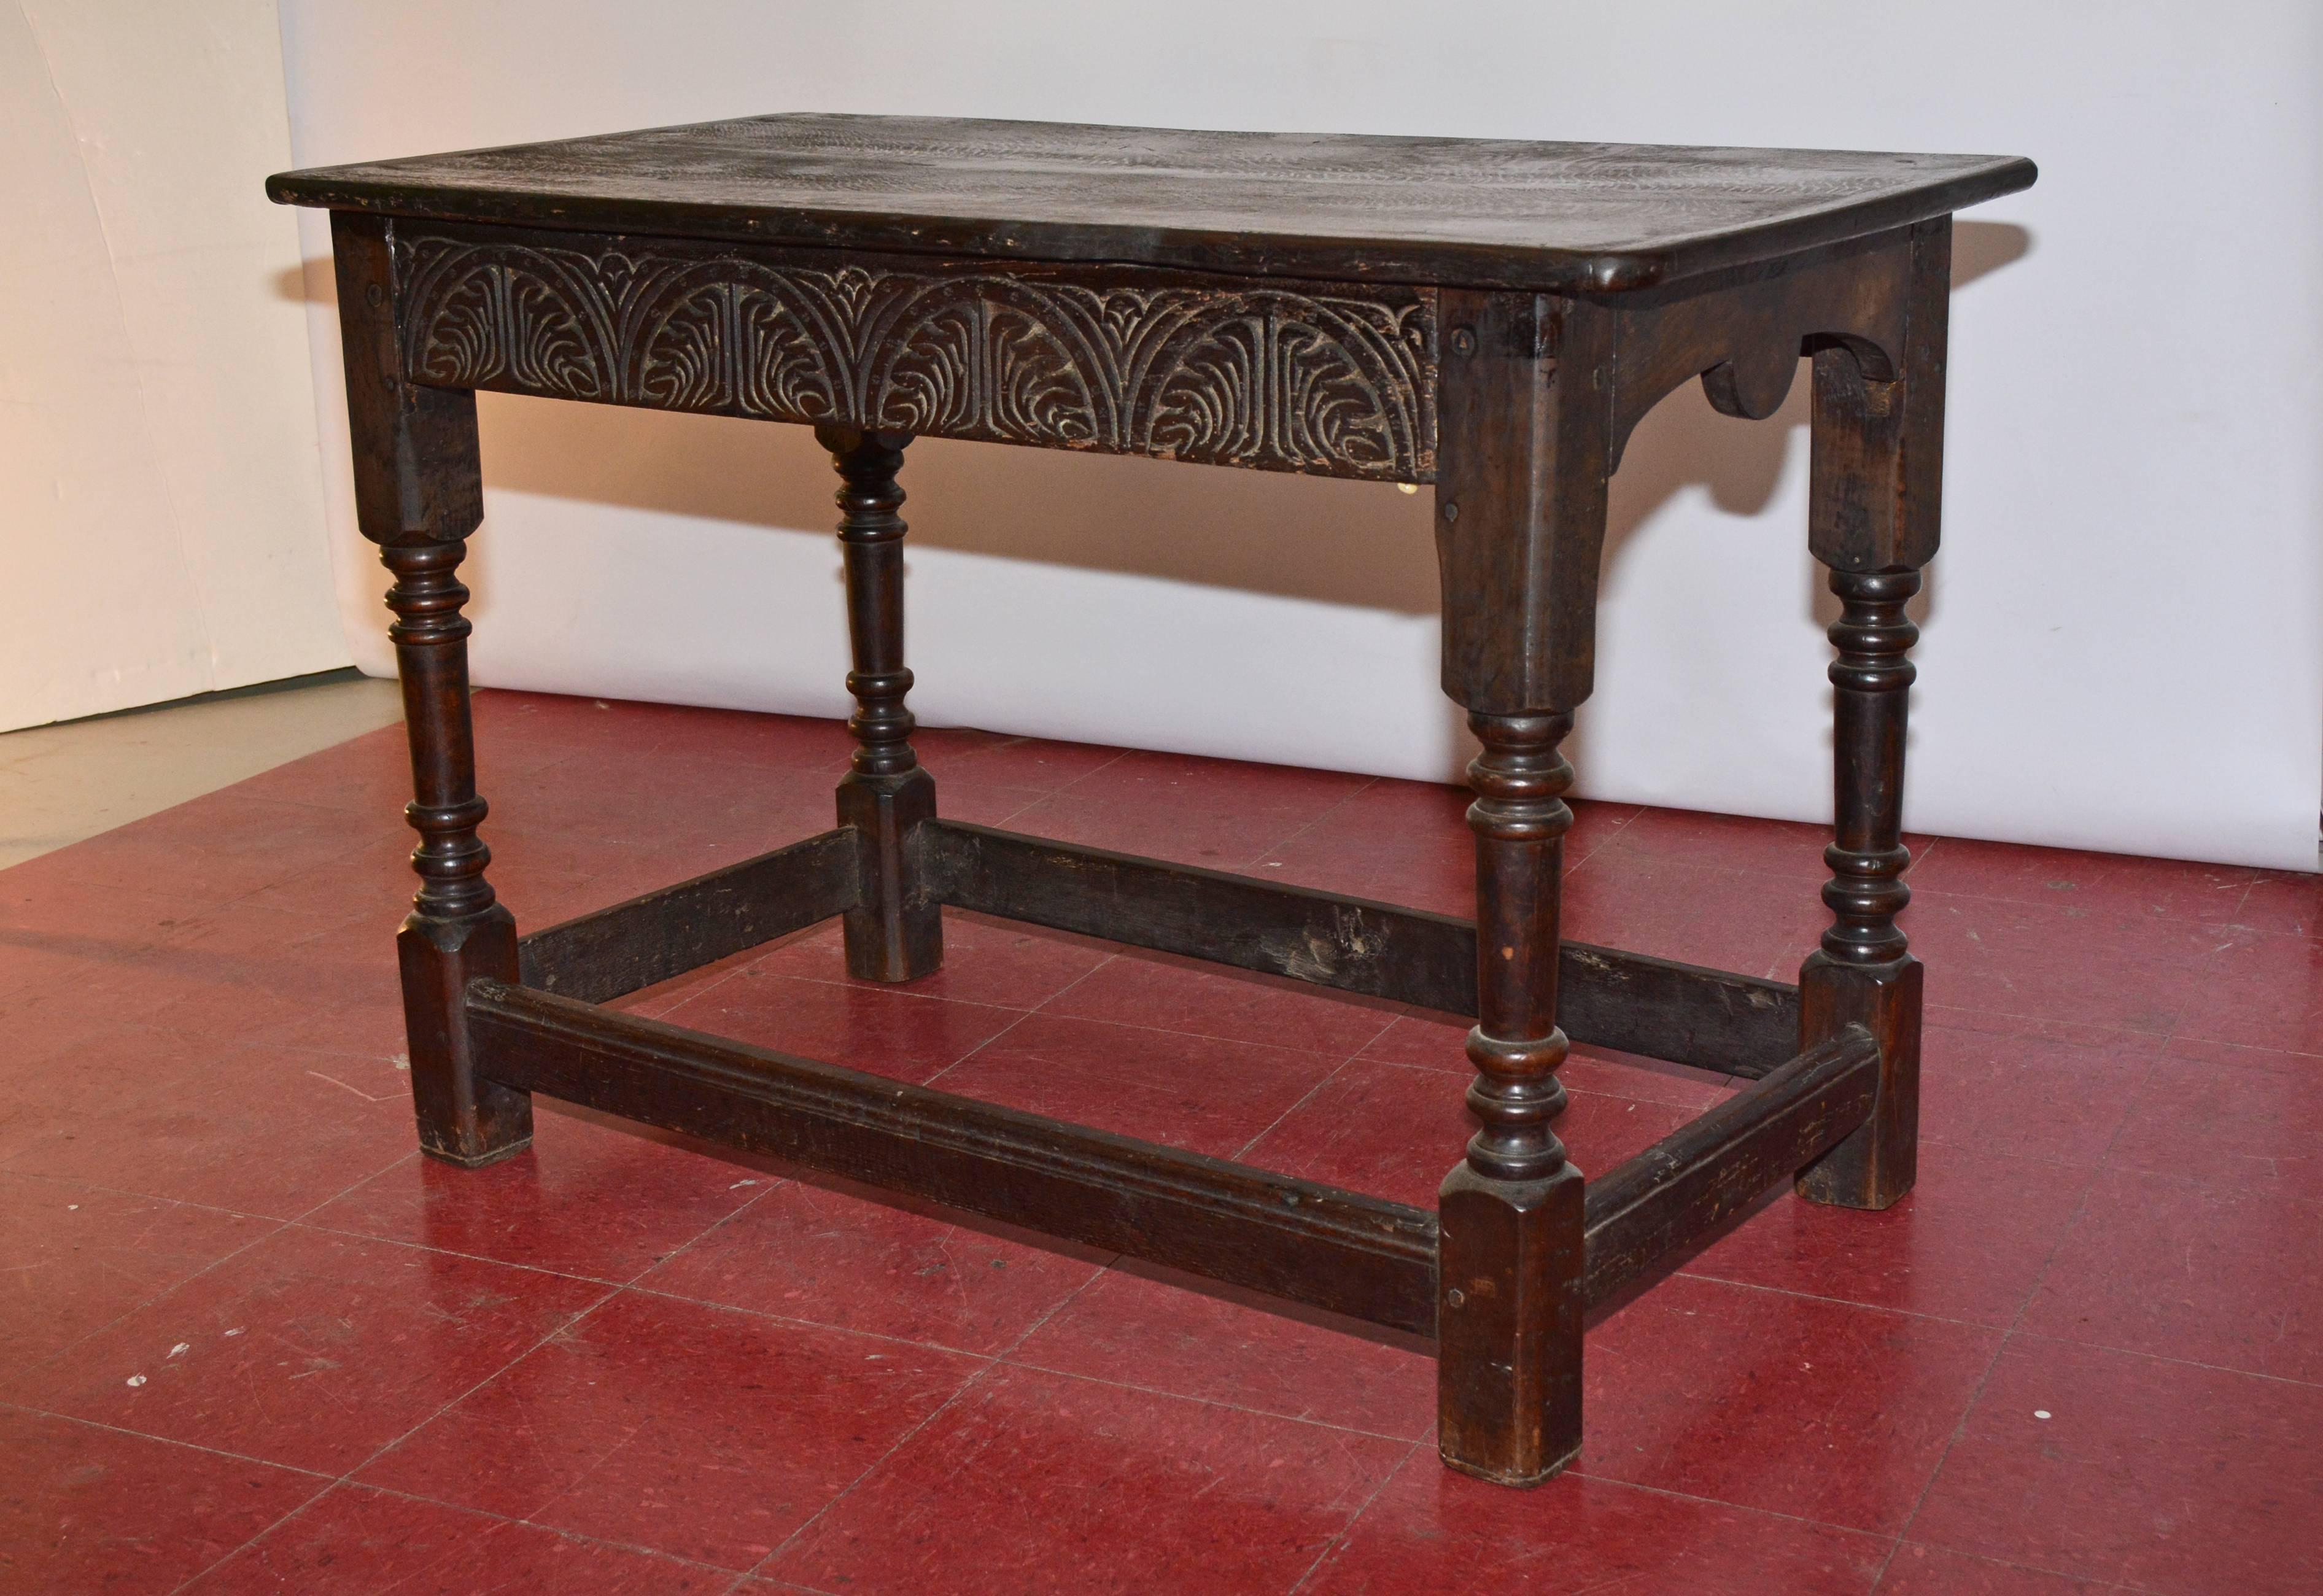 This English library or sofa table has aprons of stylized leaves carved within repeated half circles, turned legs and stretchers.